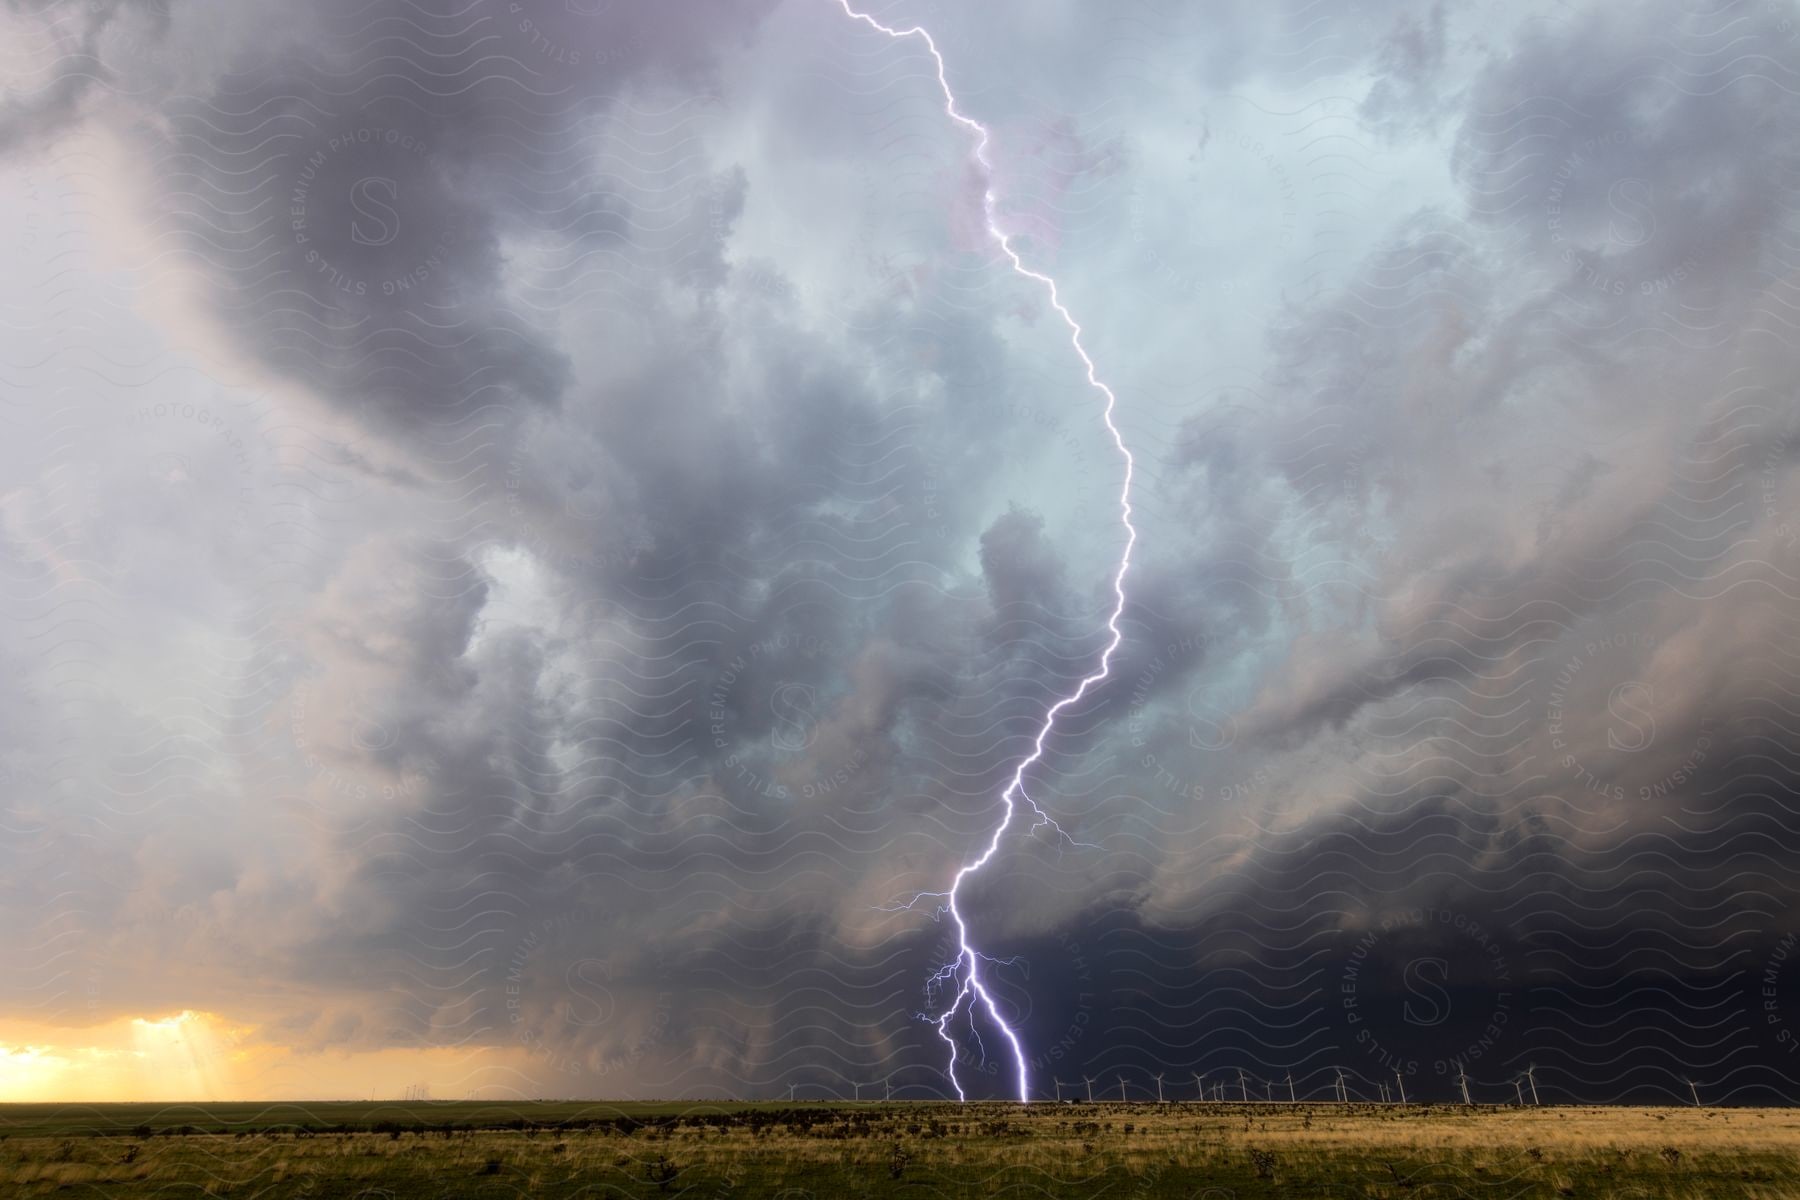 A powerful storm approaches the caprock in new mexico with lightning strikes illuminating the sky